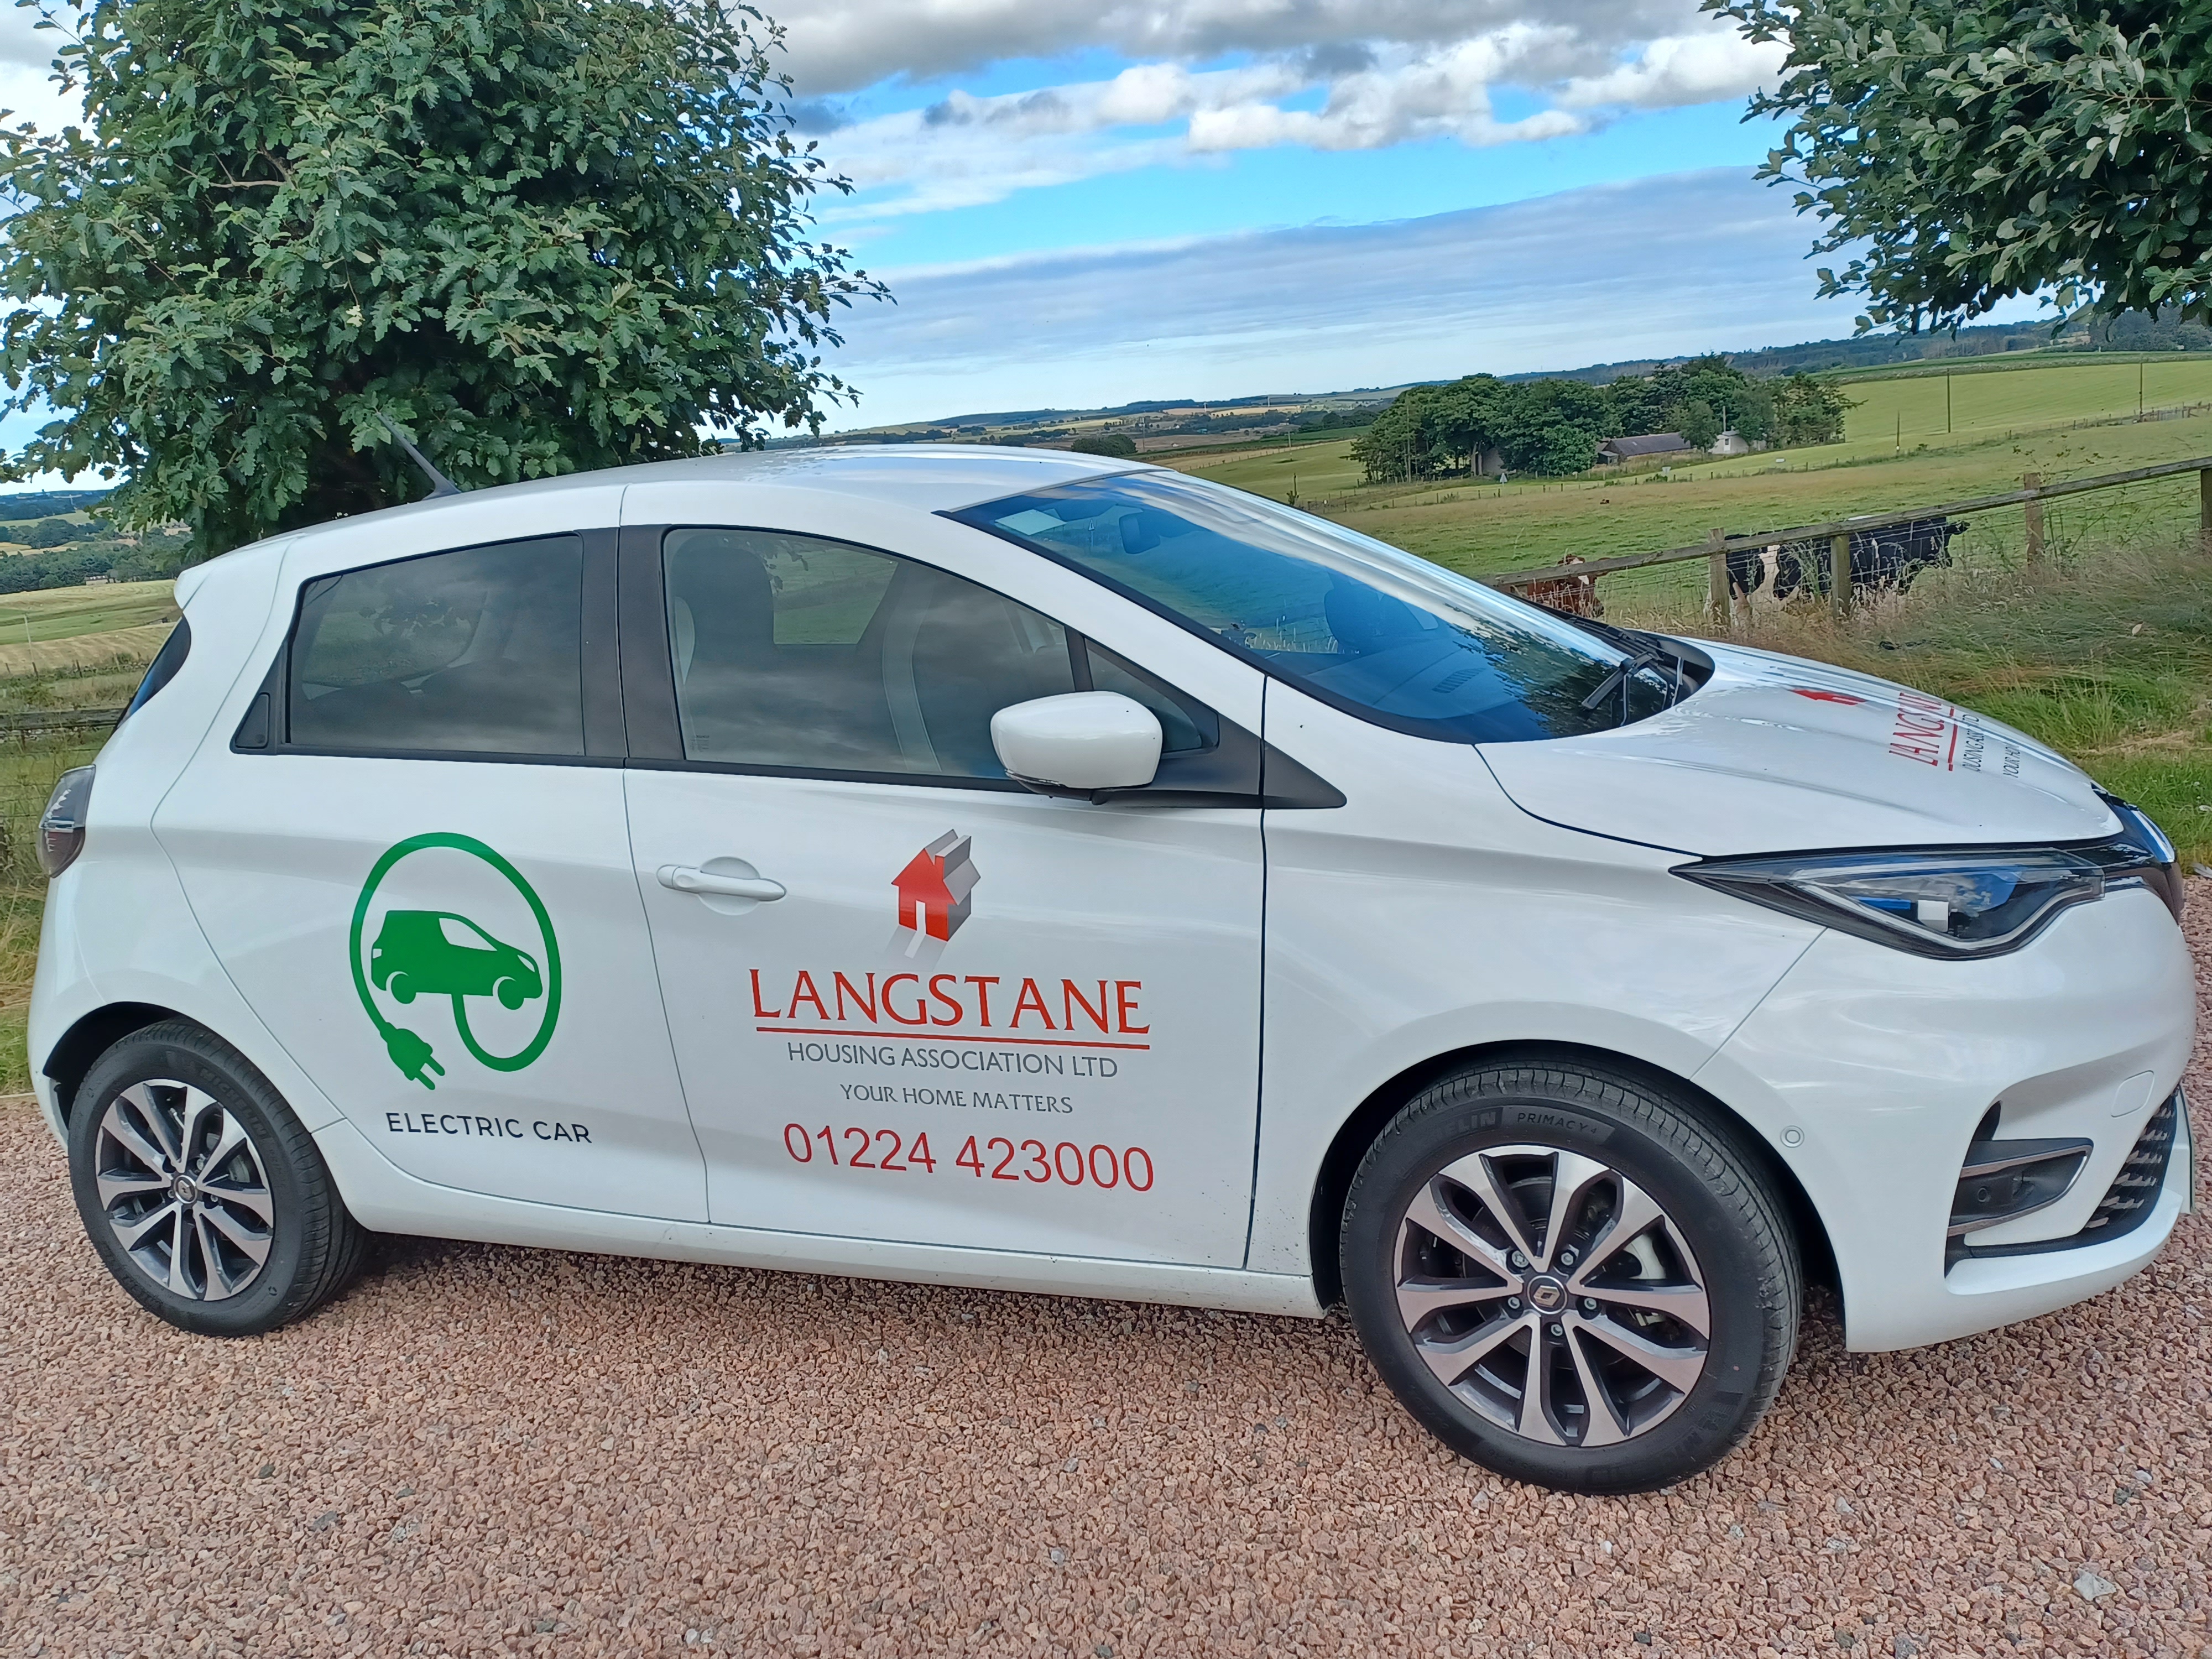 Langstane Housing Association rolls out electric pool car for employee use